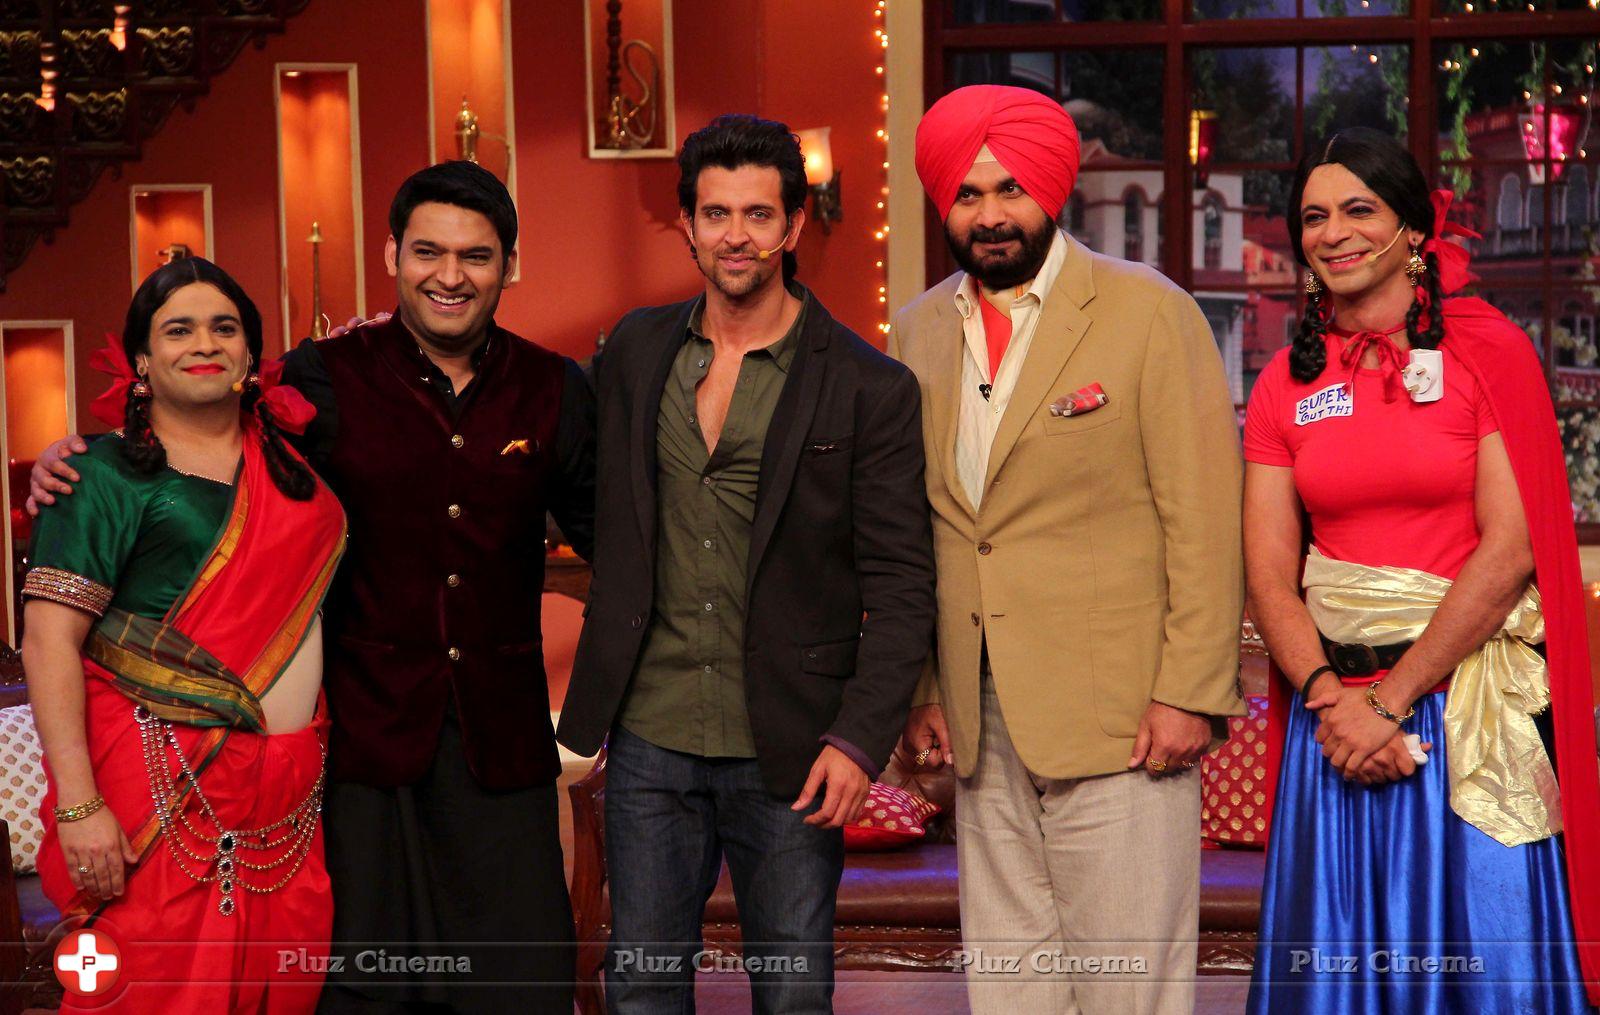 Hrithik Roshan - Hrithik Roshan Promotes Krrish 3 On the Sets Of Comedy Nights With Kapil Photos | Picture 611877